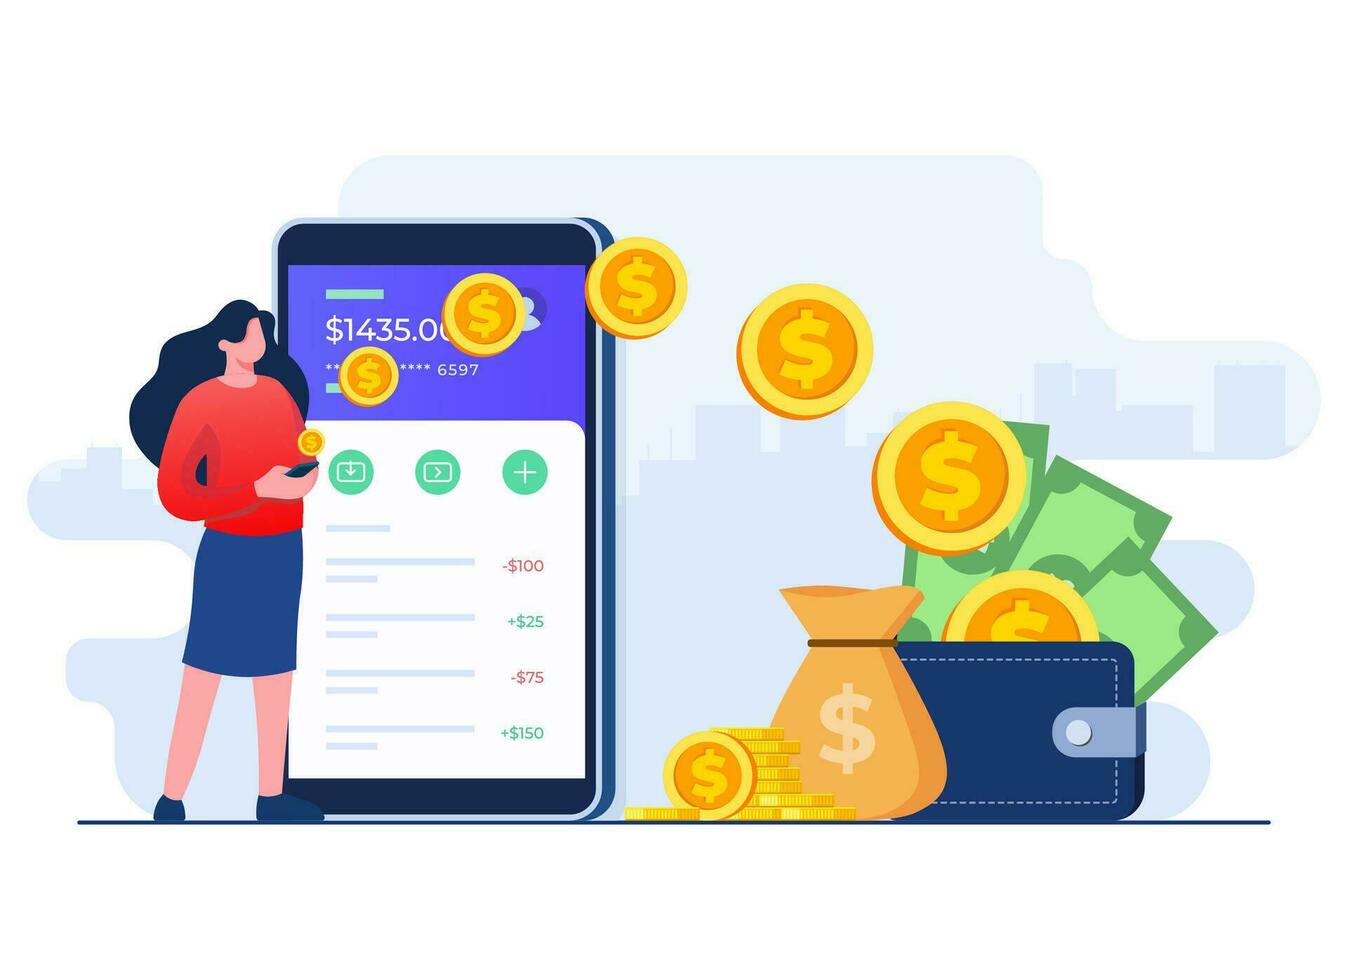 People send and receive money through mobile app, Electronic wallet, Mobile bank transaction, Secure money transfer gateway flat illustration vector template, Digital banking mobile app